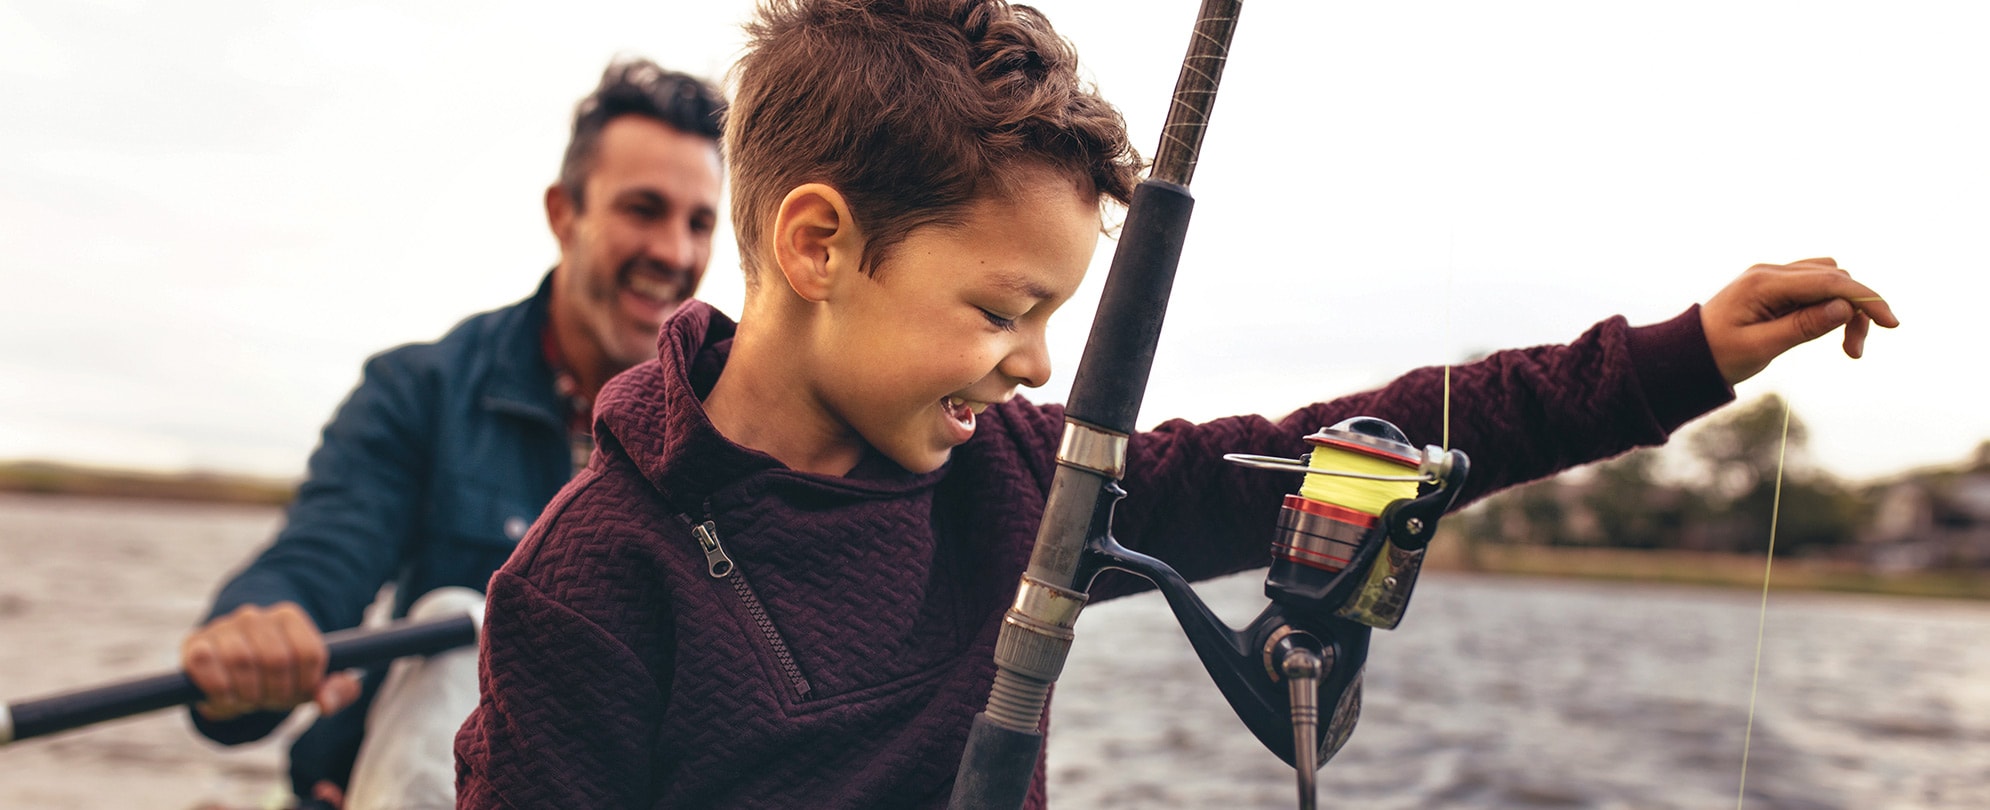 A smiling dad and son fishing on a kayak.